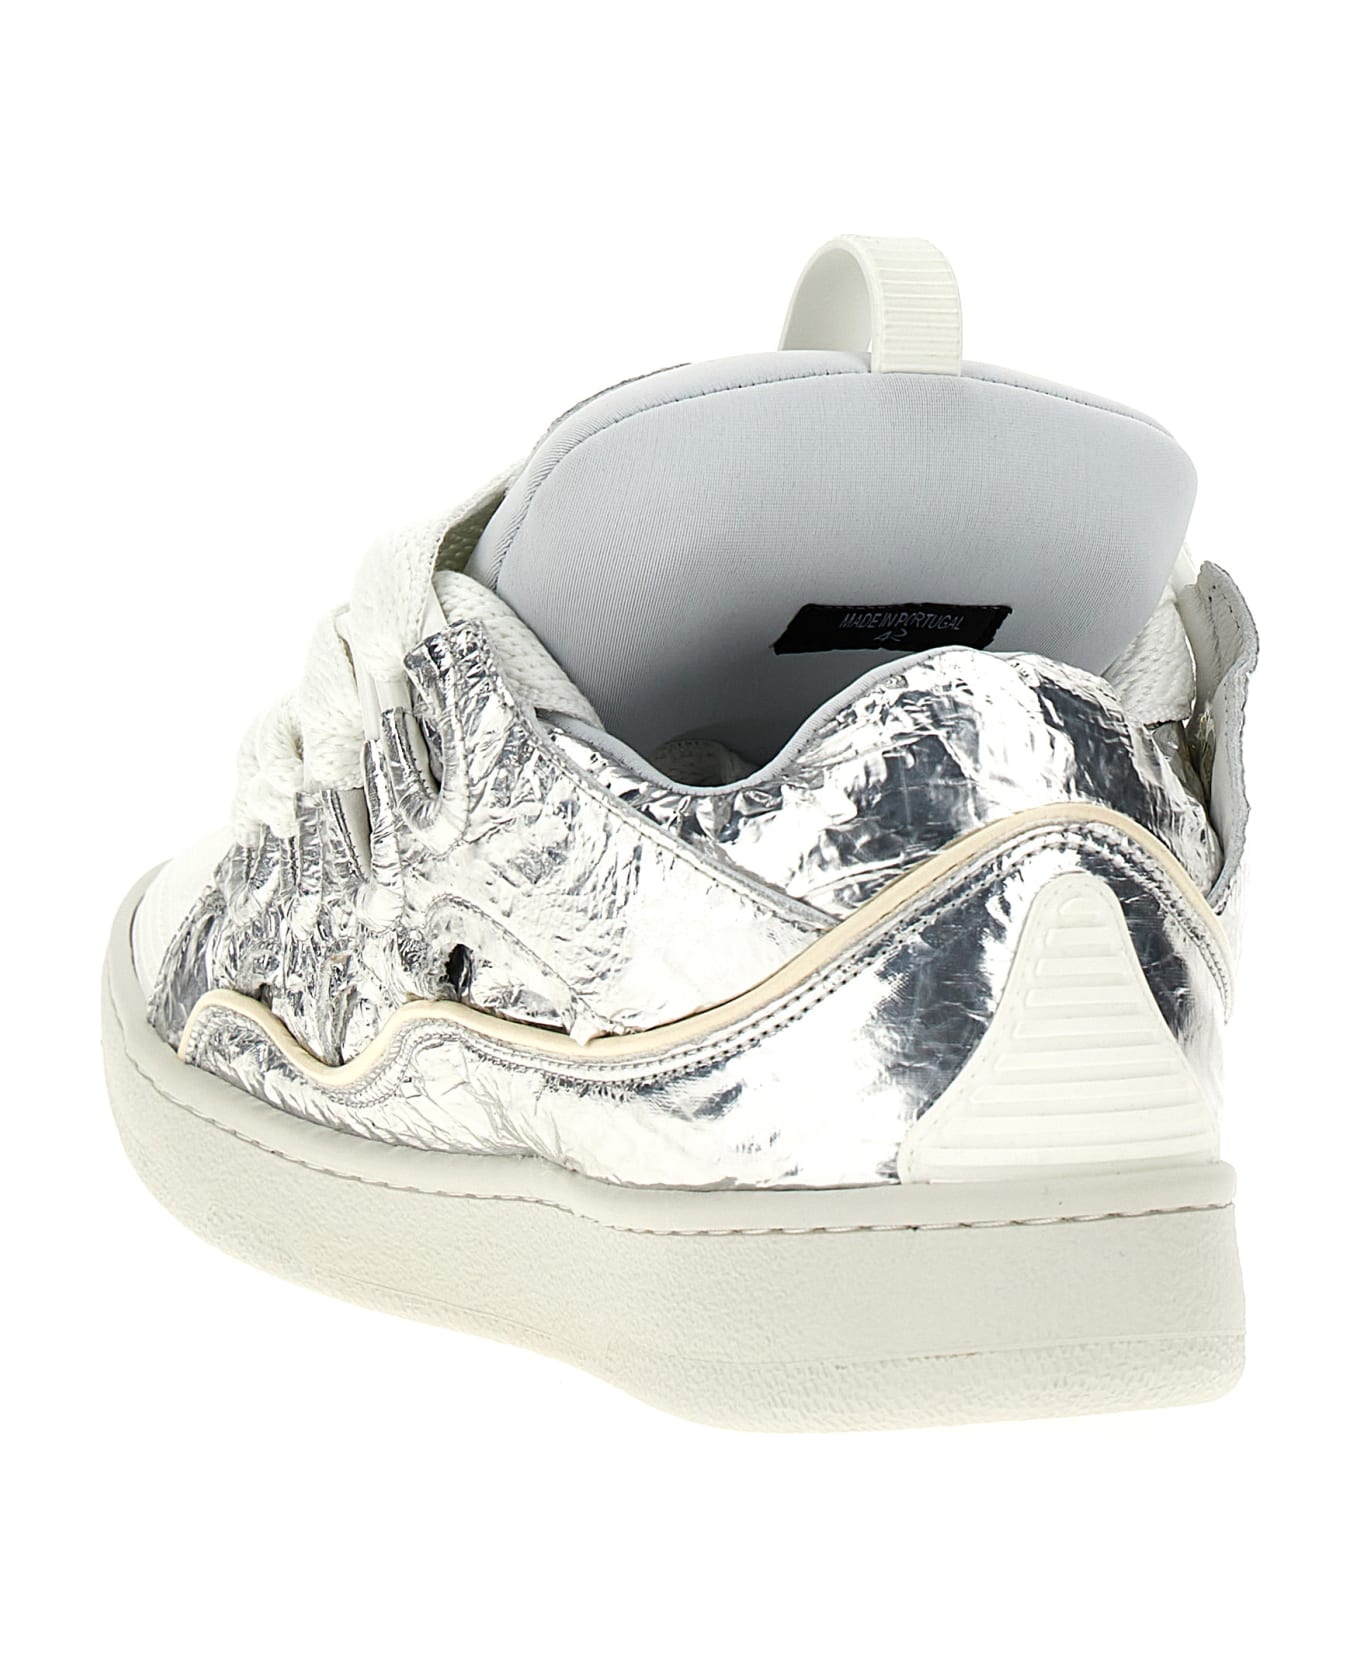 Lanvin 'curb' Sneakers - SILVER/WHITE スニーカー